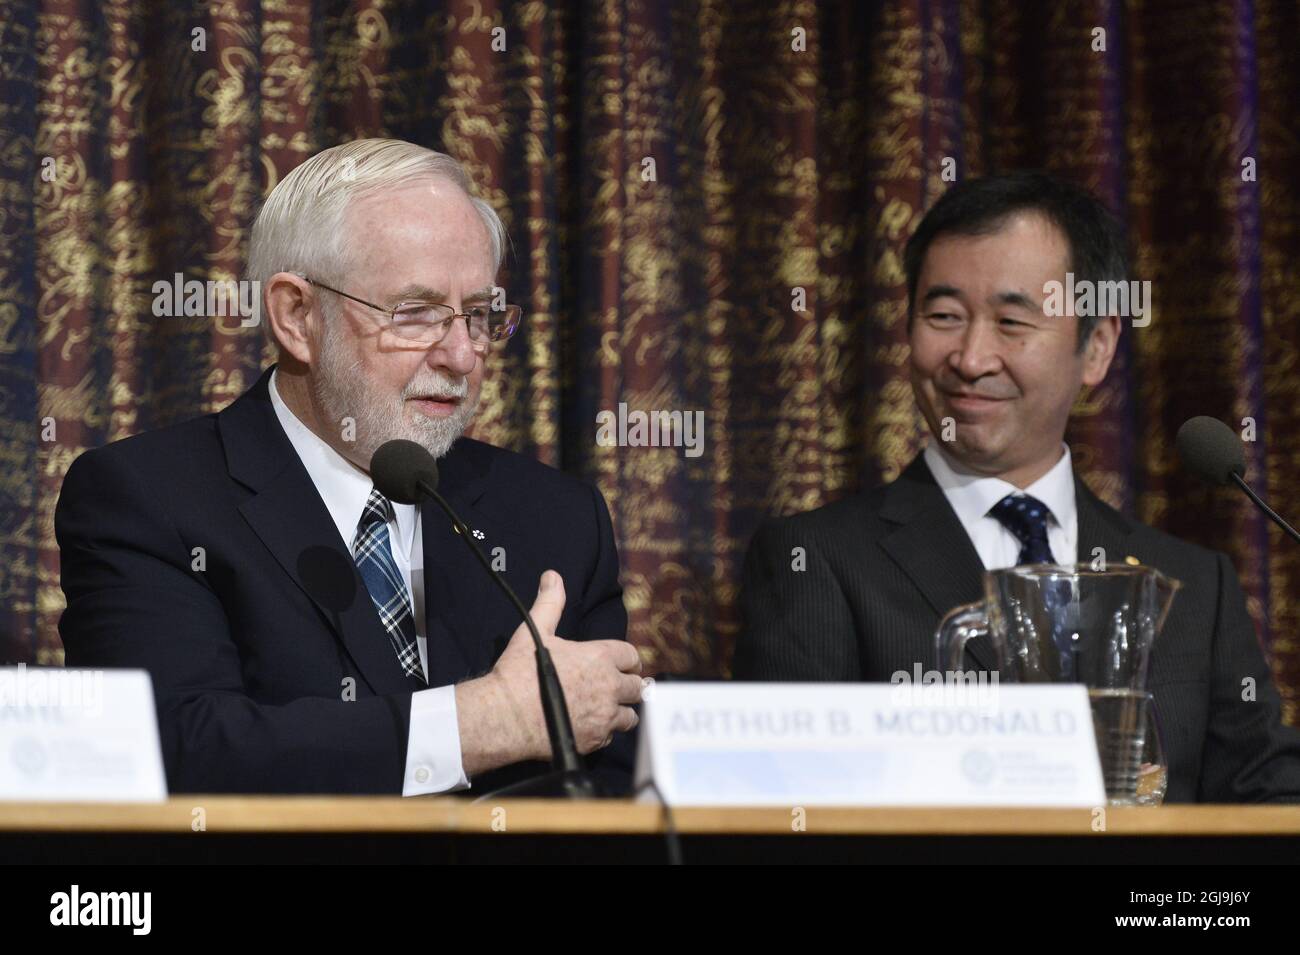 Nobel laureates in physics William C. Campbell, Drew University, Madison, NJ, USA, Nobelpristagare i fysiolog, and Takaaki Kajita, University of Tokyo, Kashiwa, Japan, during a press conference at the Royal Swedish Academy of Science in Stockholm, December 7, 2015. Photo: Anders Wiklund / TT  Stock Photo